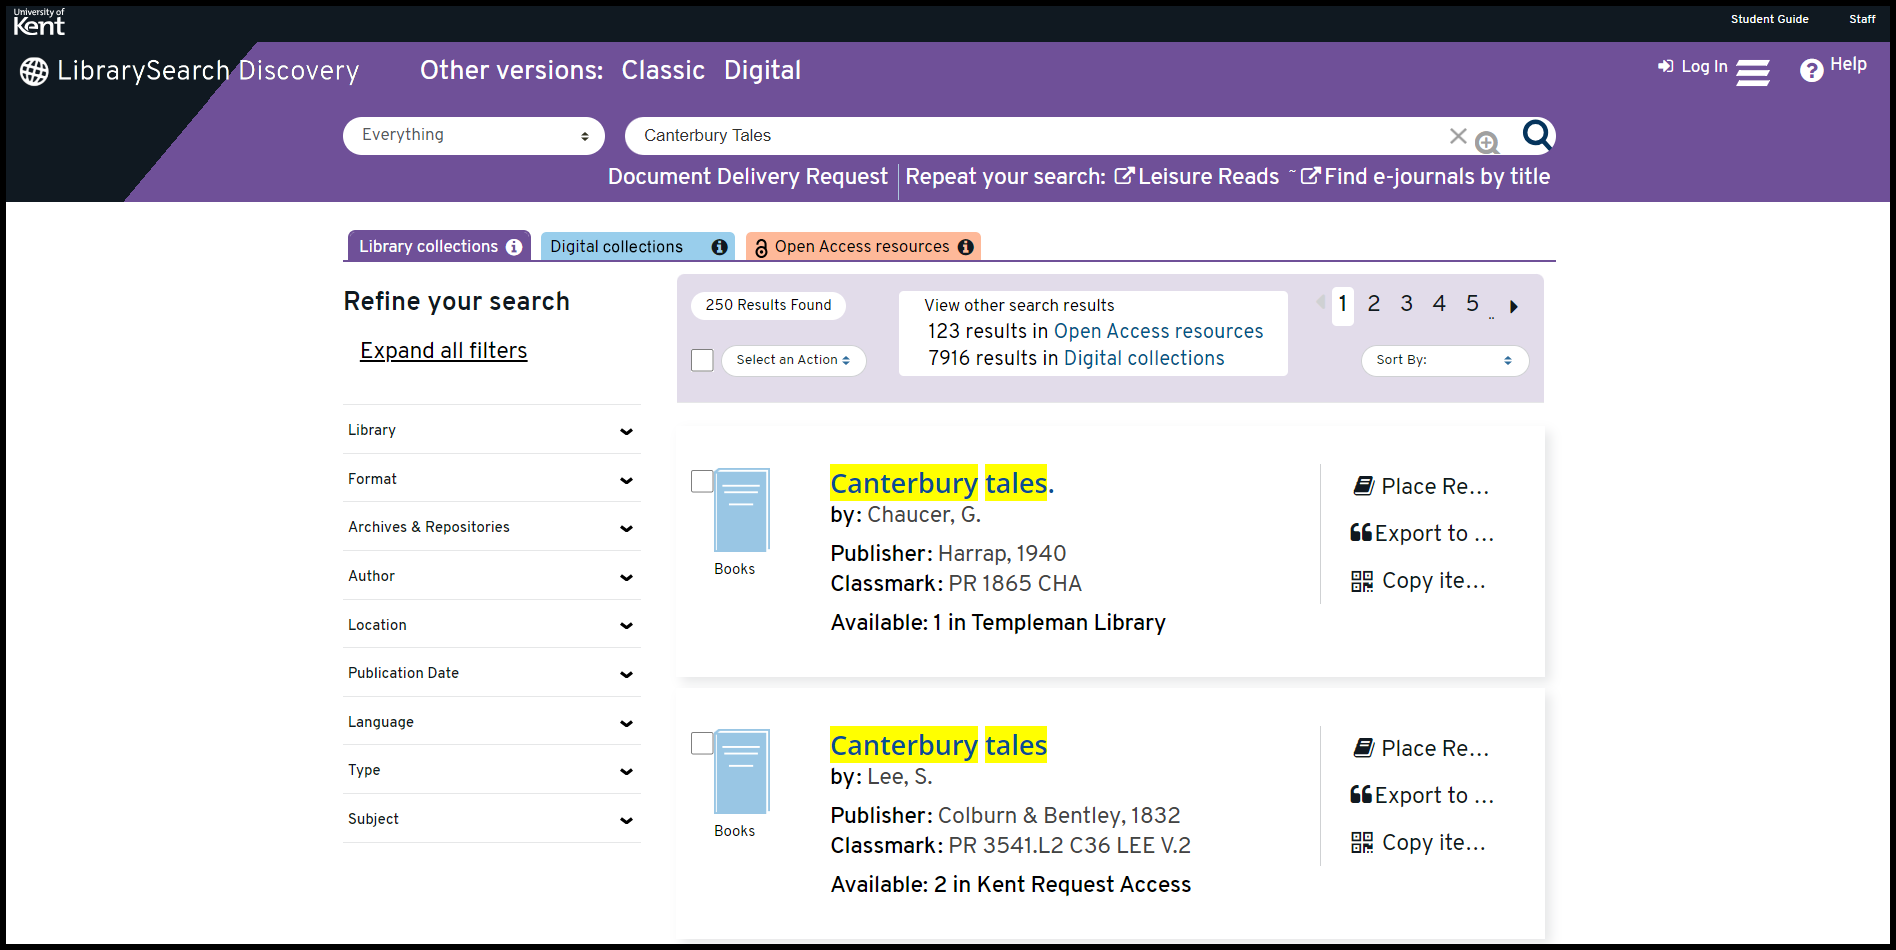 Screenshot showing LibrarySearch Discovery search results screen showing location of new tabbed search content: Library collections; Digital collections and Open Access resources.